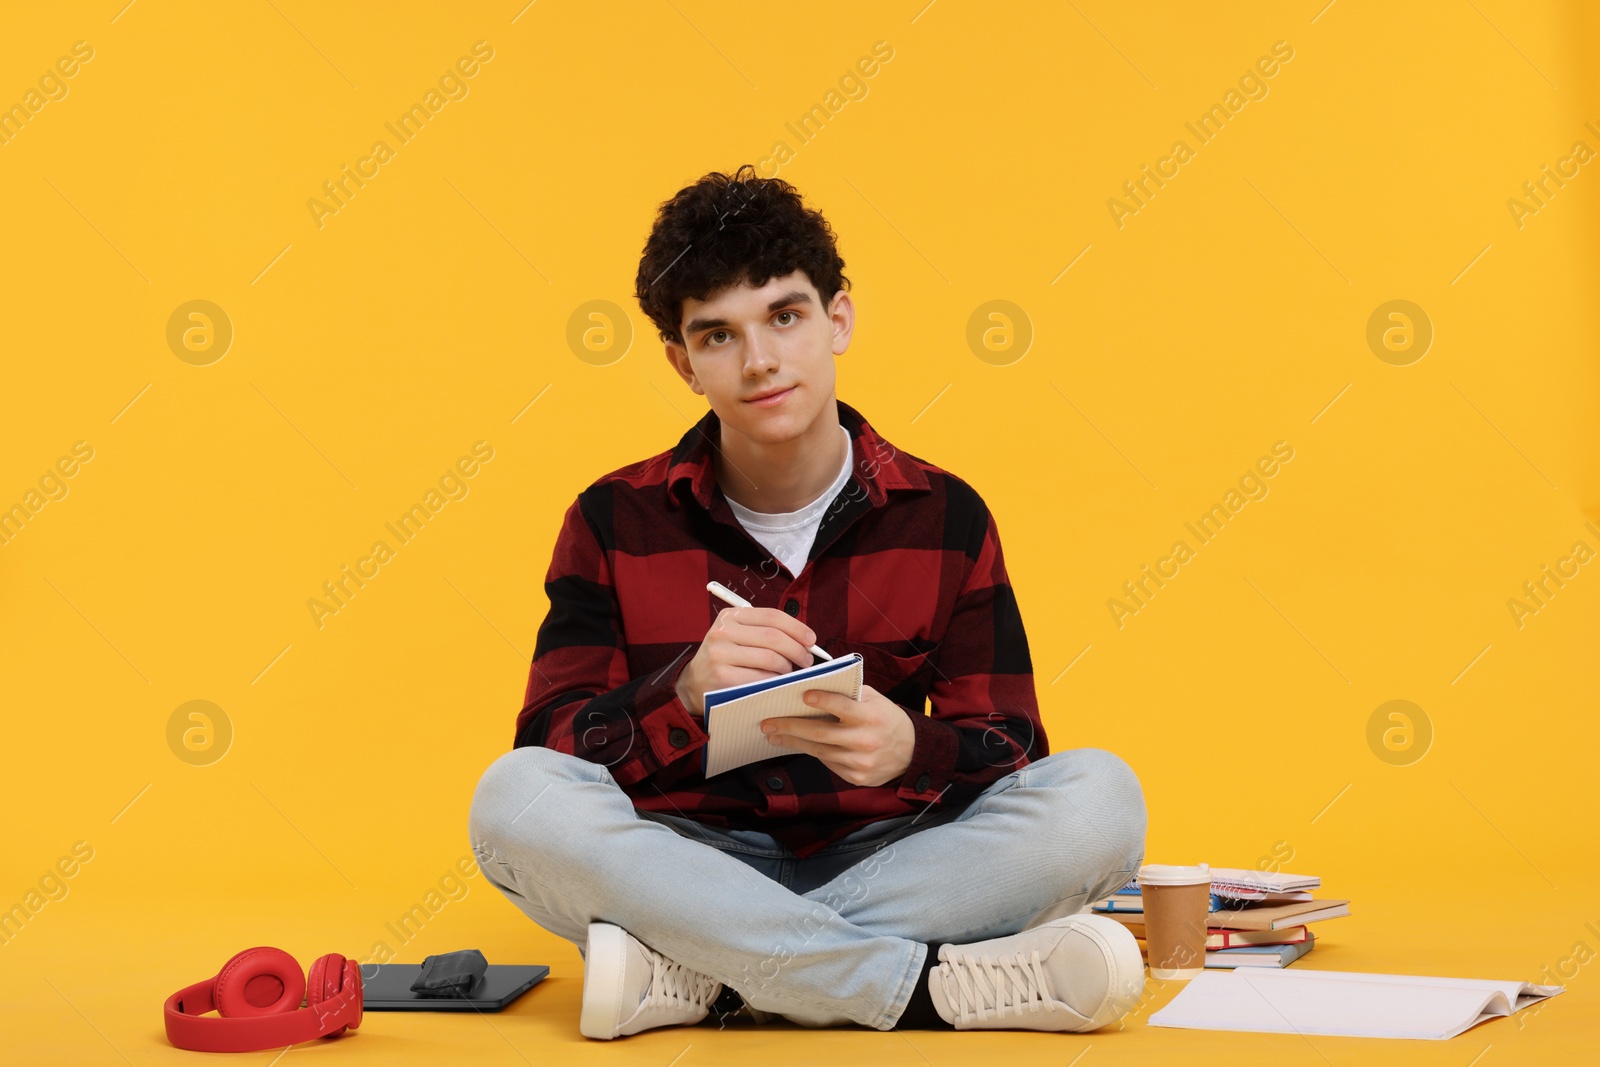 Photo of Portrait of student with notebook and stationery sitting on orange background